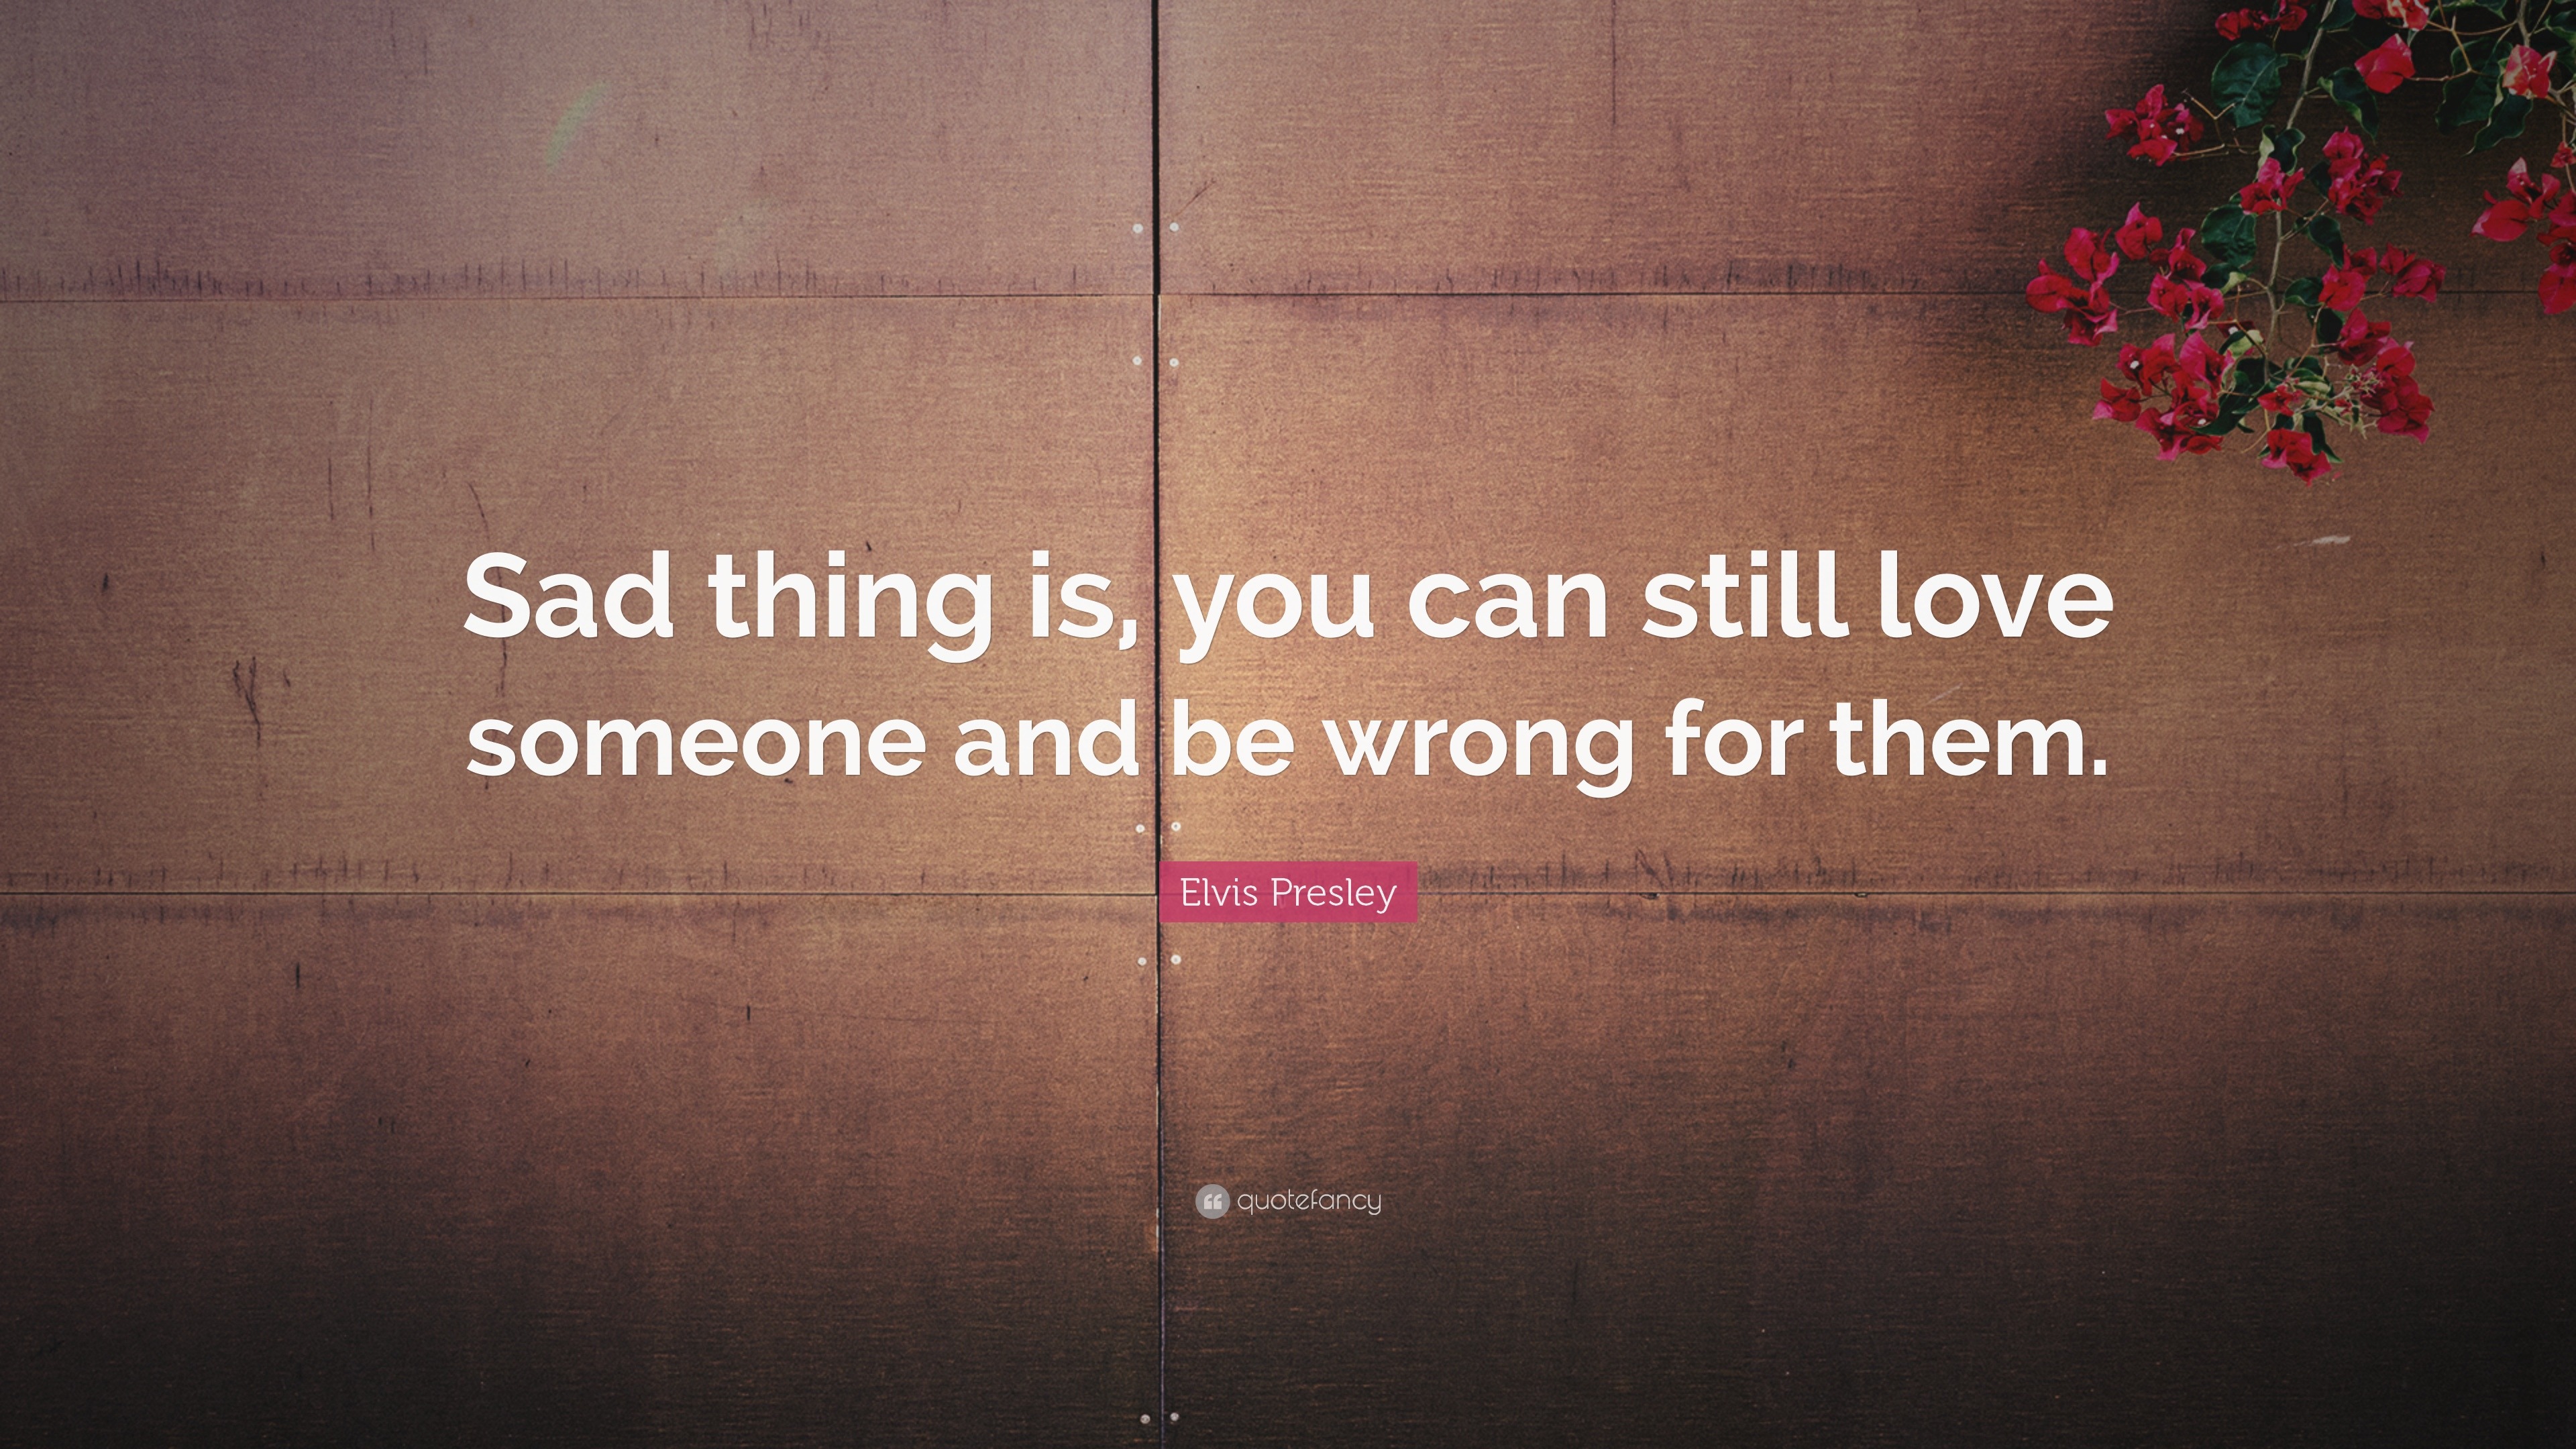 Elvis Presley Quote “Sad thing is you can still love someone and be